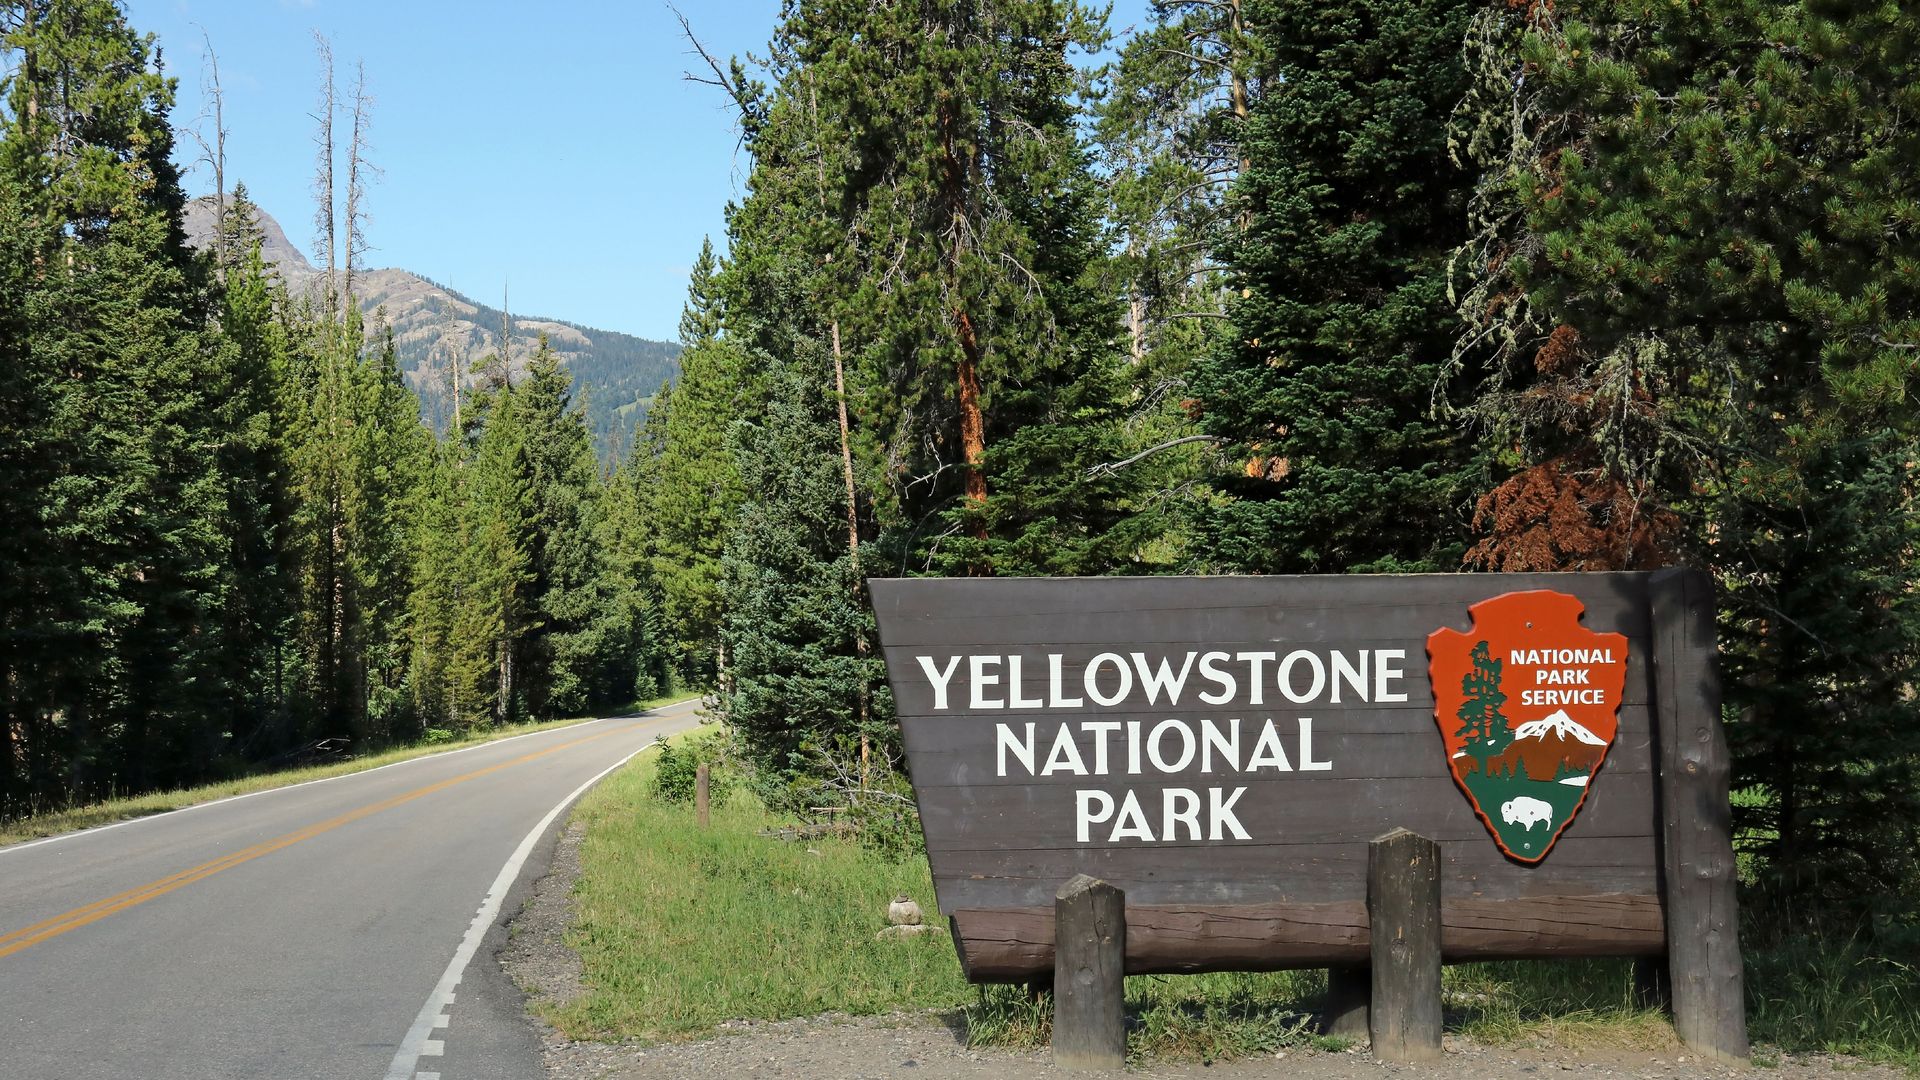 The Yellowstone Park sign.